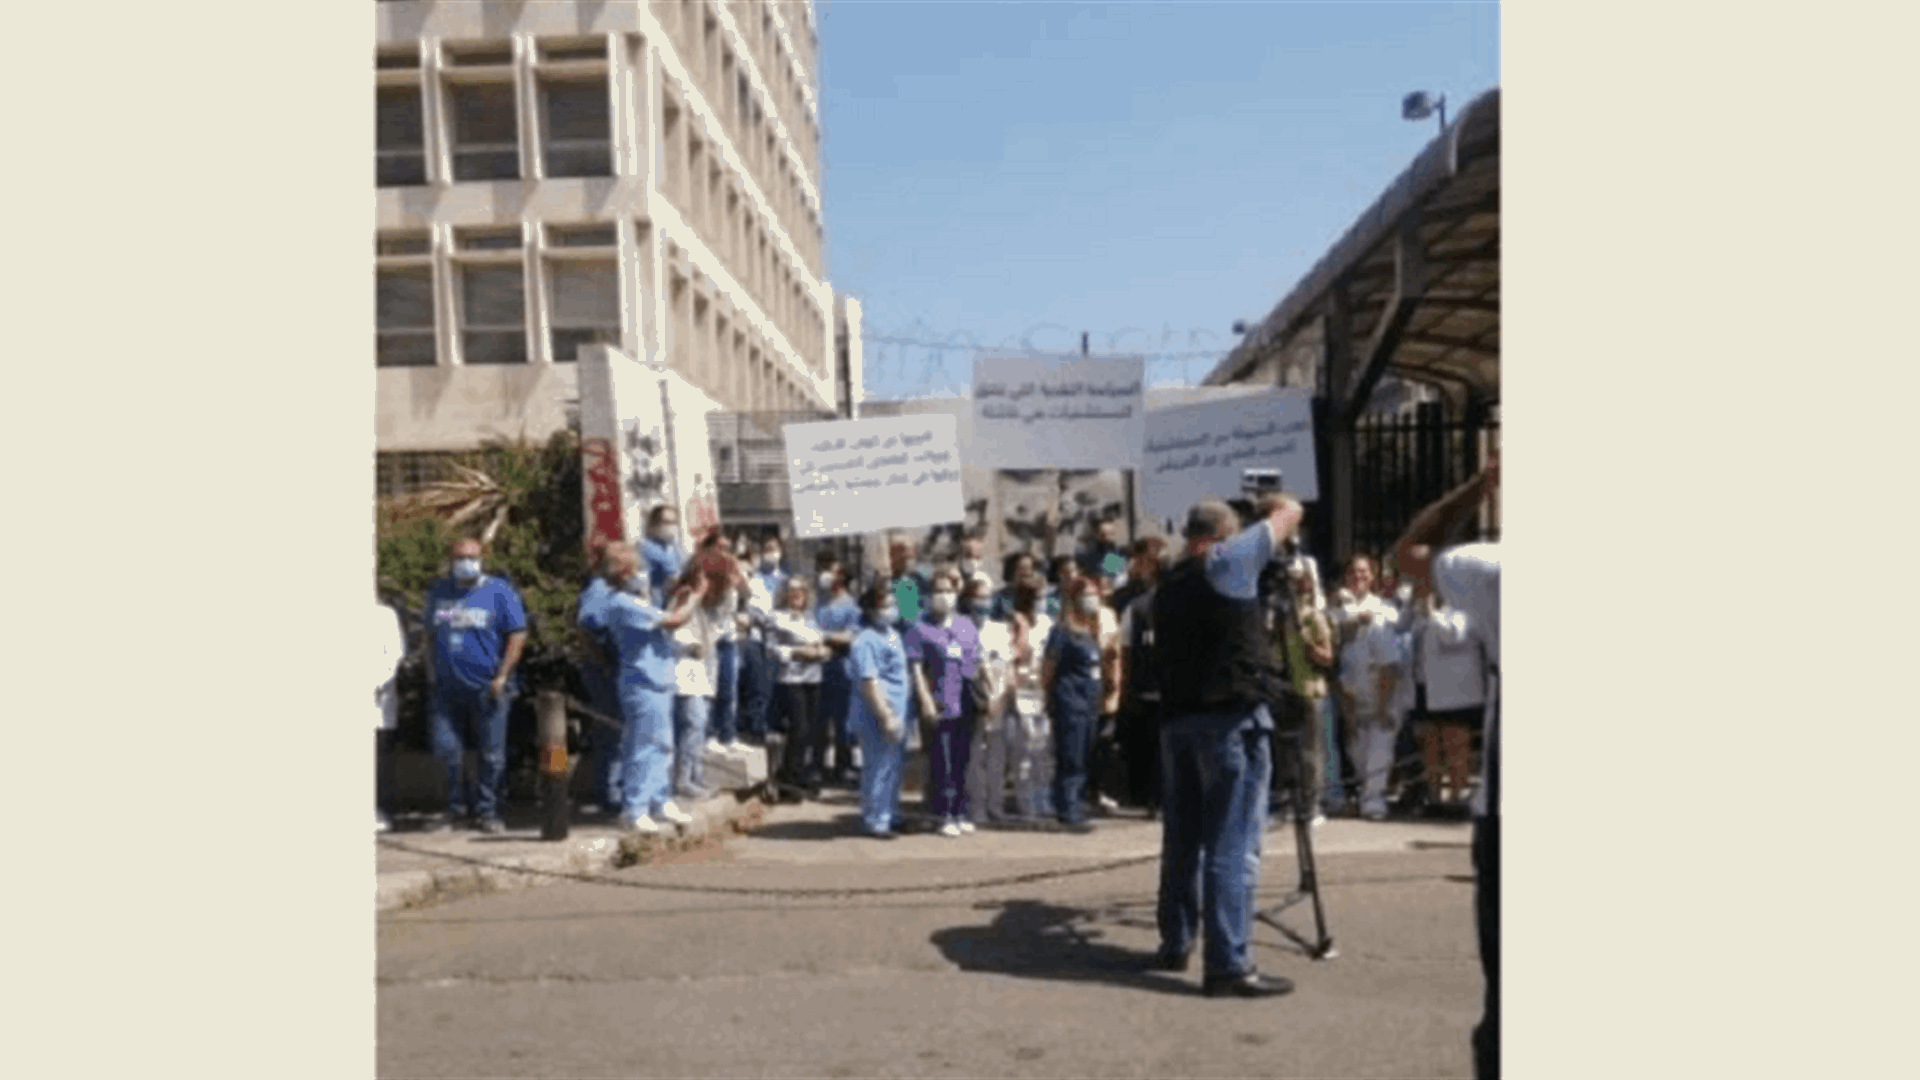 Doctors stage sit-in in front of Banque Du Liban